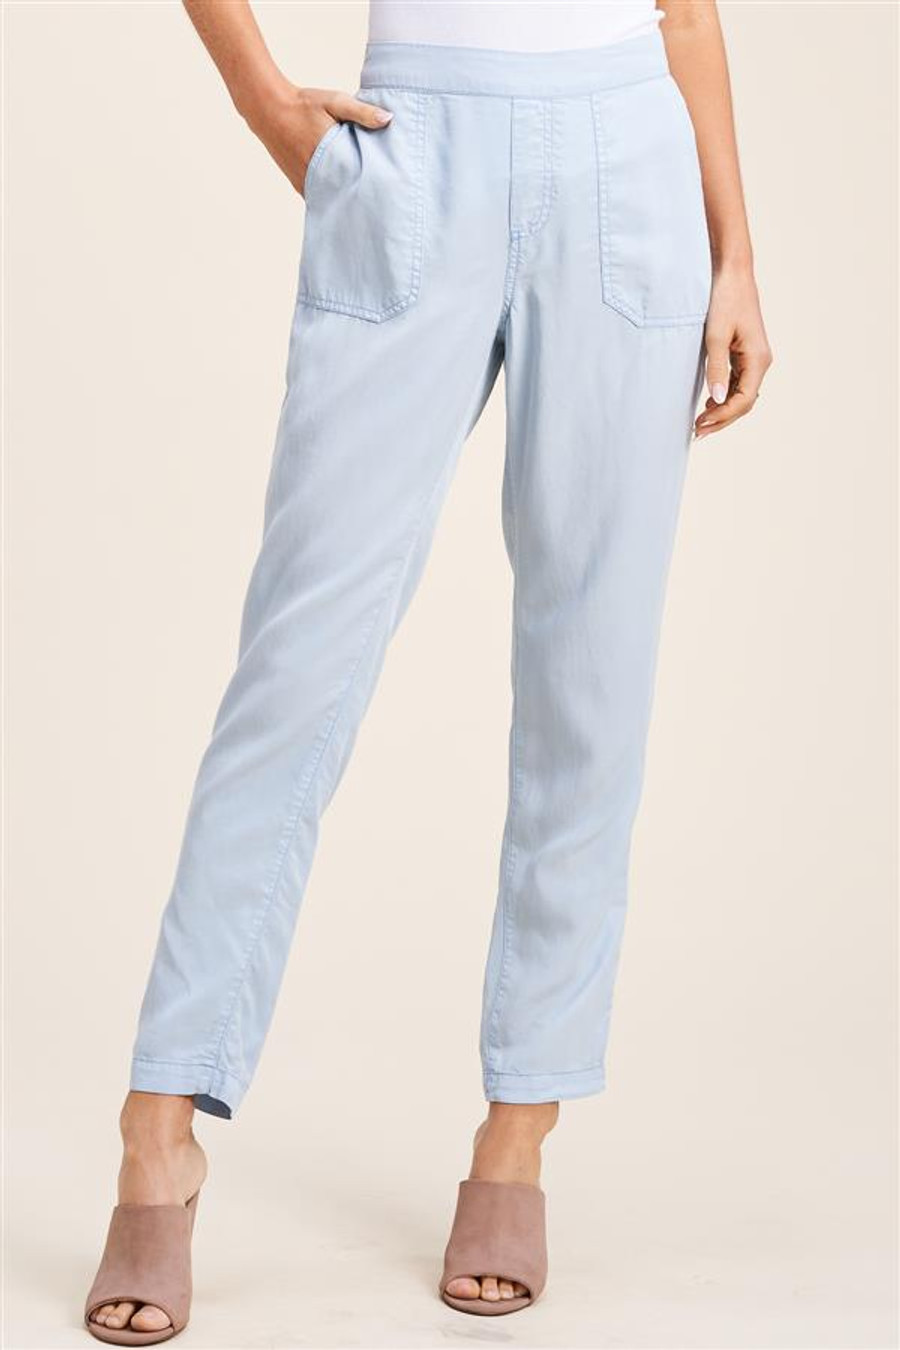 Staccato Garment Dyed Pants - Chambray